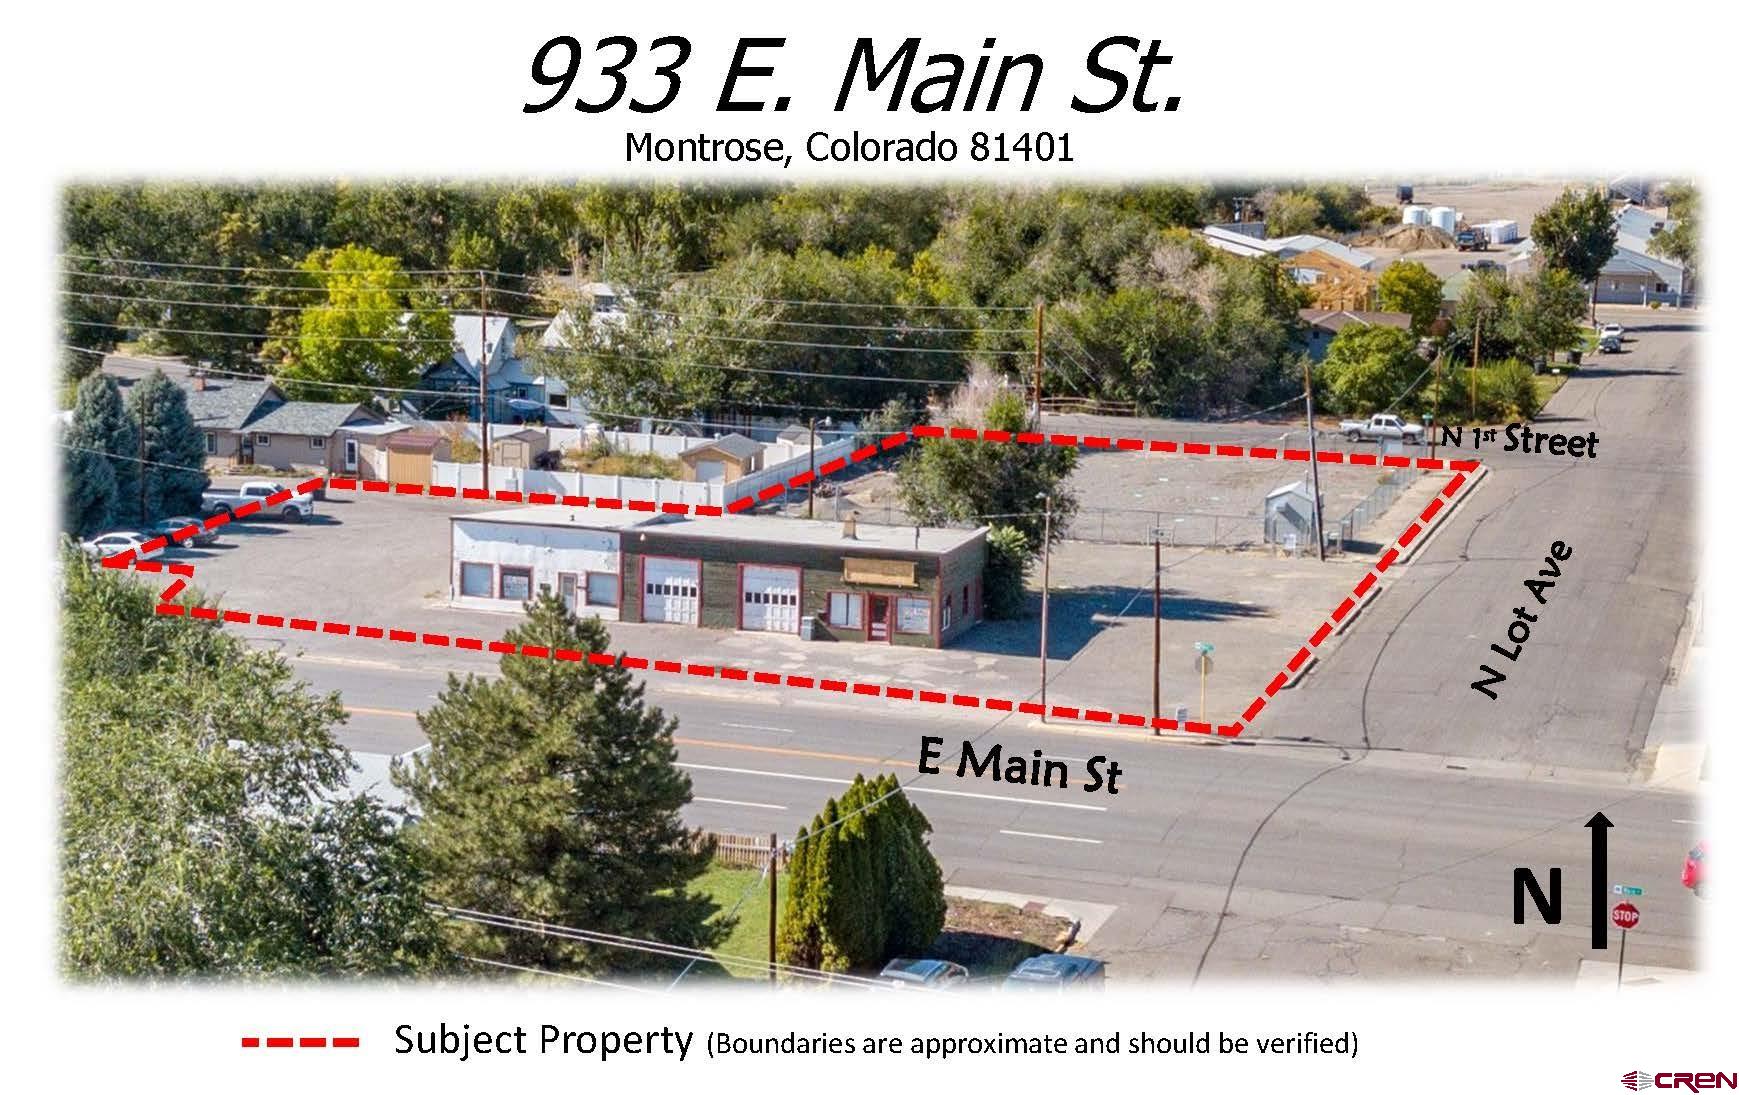 PRIME E. MAIN ST CORNER LOCATION!   Main St Building with Many Possibilities!   3,792 sq.ft. (MOL) building on .844-acre (MOL) lot, located near destinations such as Coffee Trader, Horsefly Brewing Company, Phelanies, and the Montrose County Fairgrounds with the new Events Center. Building features two 9’W x 10’H overhead doors, one 9’4”W x 8’7”H sliding door, office space, bathroom and ample workspace. Back half of lot is fully fenced for security. Property is easily accessed and has off-street parking. Zoned “B-2” in the City of Montrose allows for retail stores, business and professional offices, service establishments and multifamily development potential. The Montrose Arroyo runs under property which would not allow for any new structures to be within 20 ft. horizontally on both sides of the pipe, and any drainage or structural issues will be the responsibility of the lot owner. The City of Montrose has plans to reroute the arroyo in the next 5 to 10+ years.  Incredible tax break with Opportunity Zone designation!